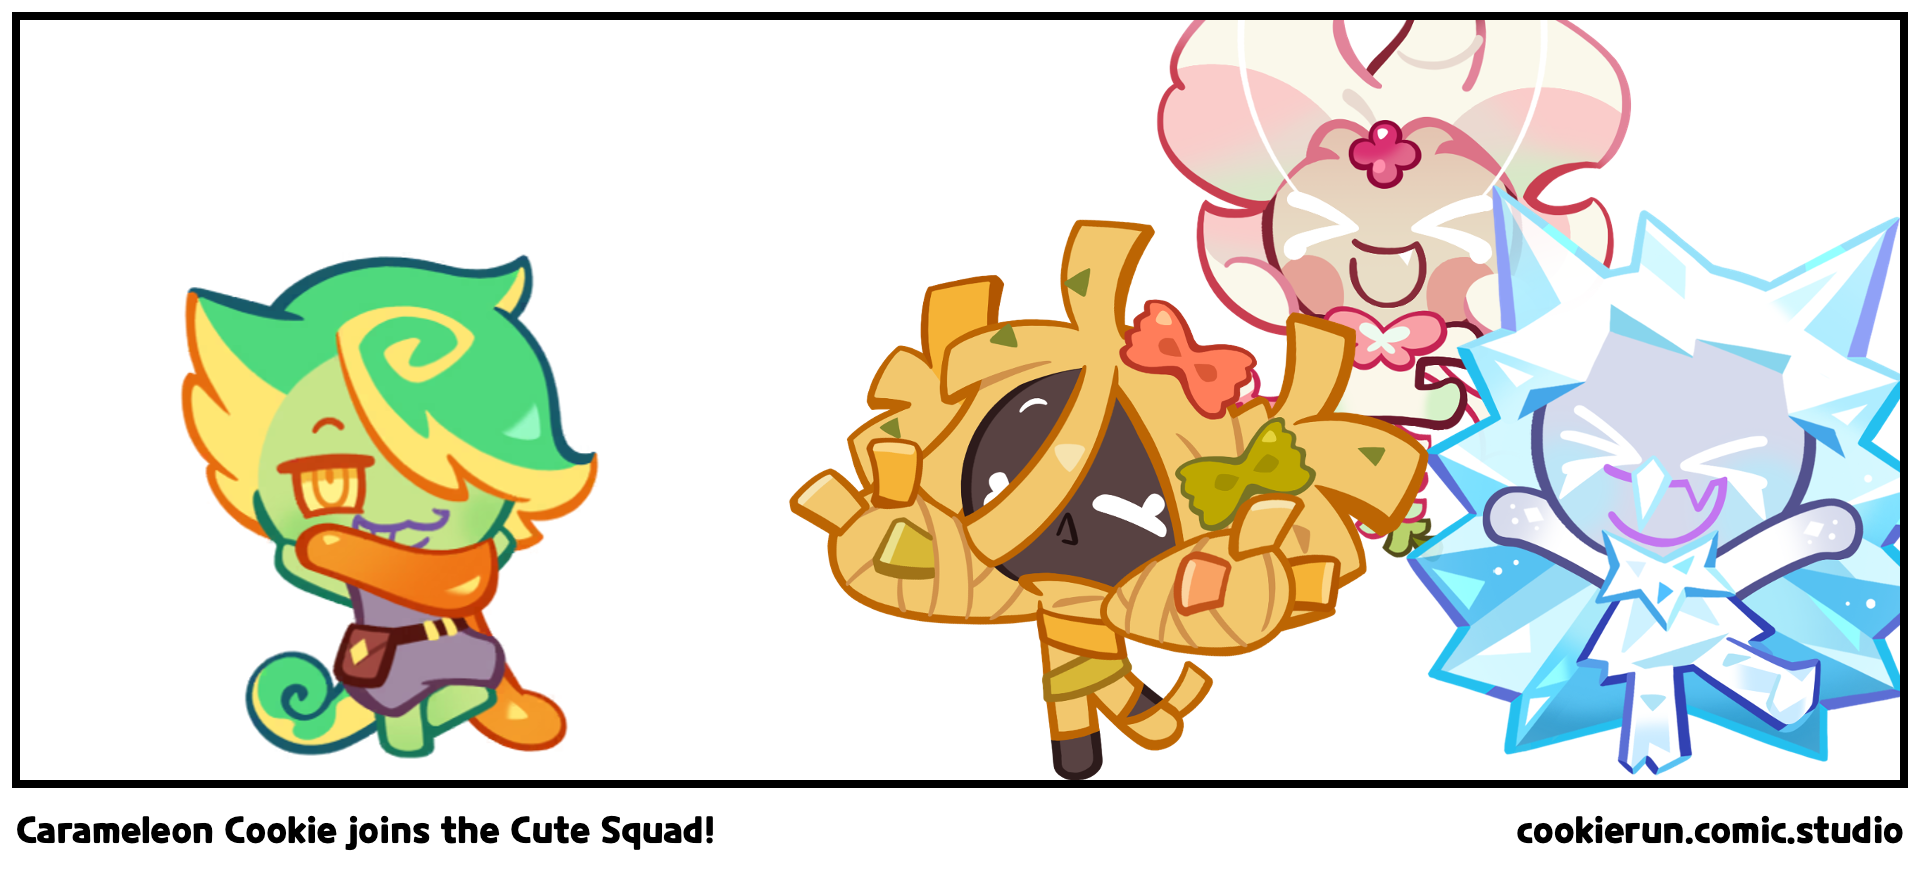 Carameleon Cookie joins the Cute Squad!